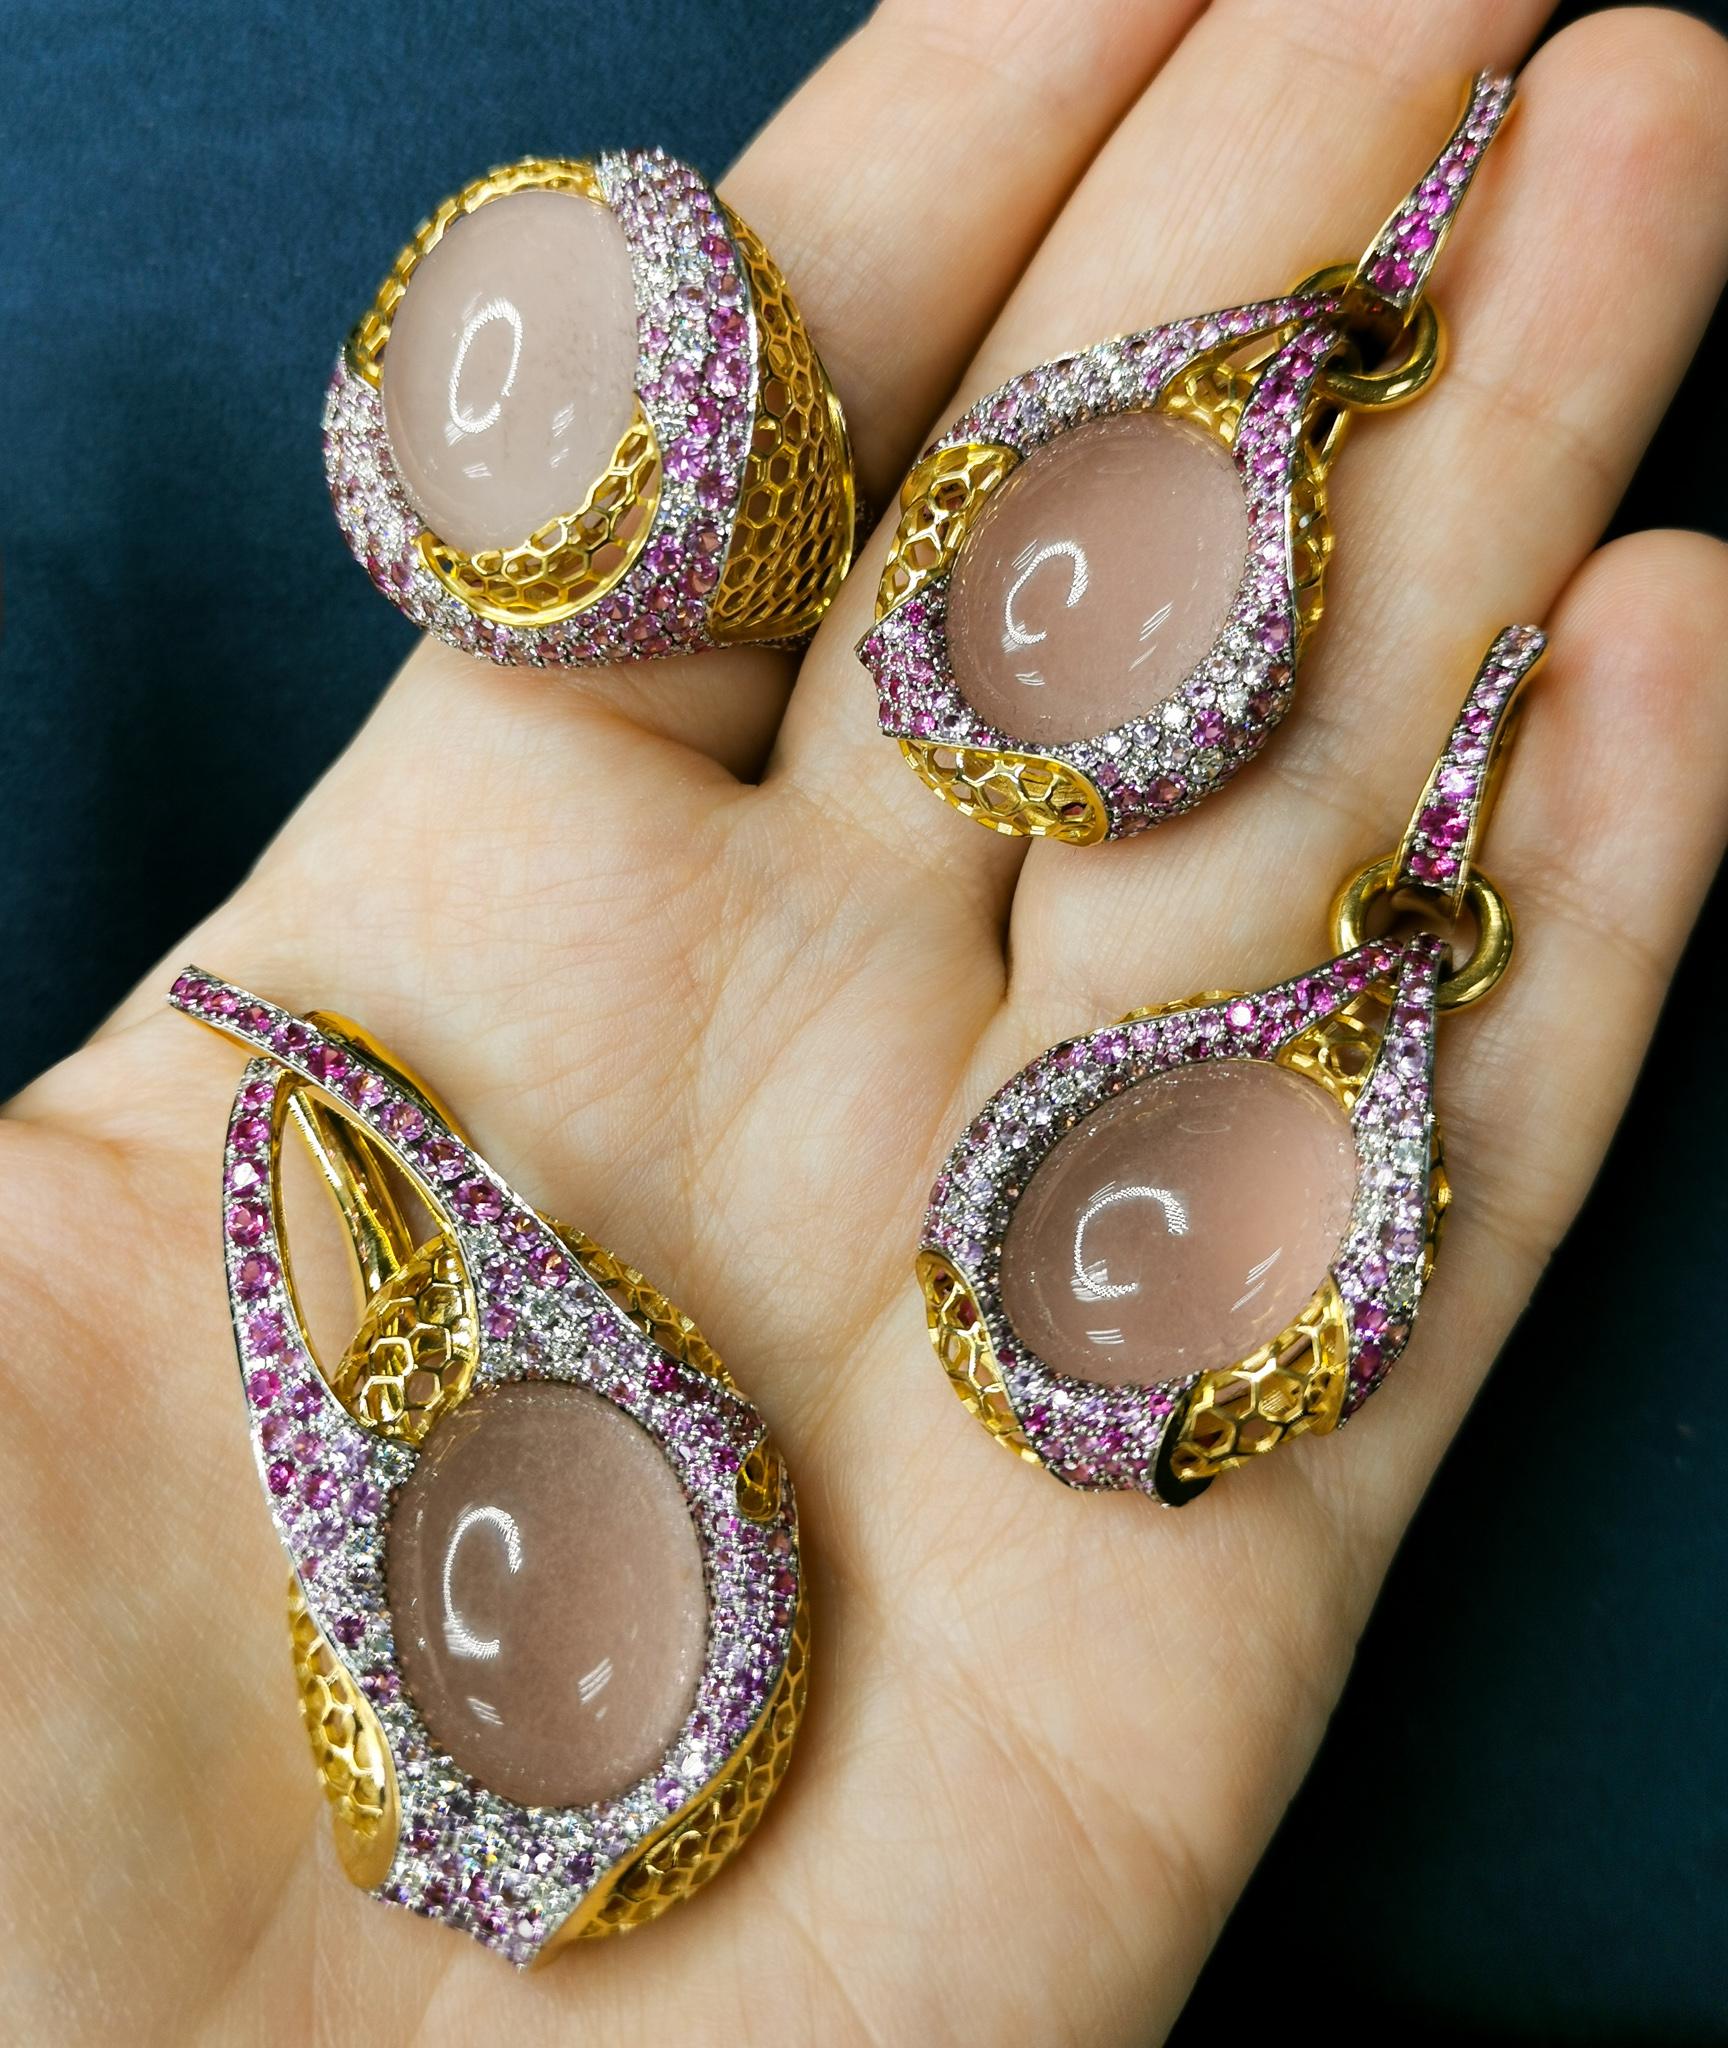 Rose Quartz Diamonds Pink Sapphires 18 Karat Yellow Gold Suite
What kind of patterns has not been created by nature. Honeycomb is one of them. Take a look at our 18 Karat Yellow Gold Suite from the New Age collection, it perfectly follows the